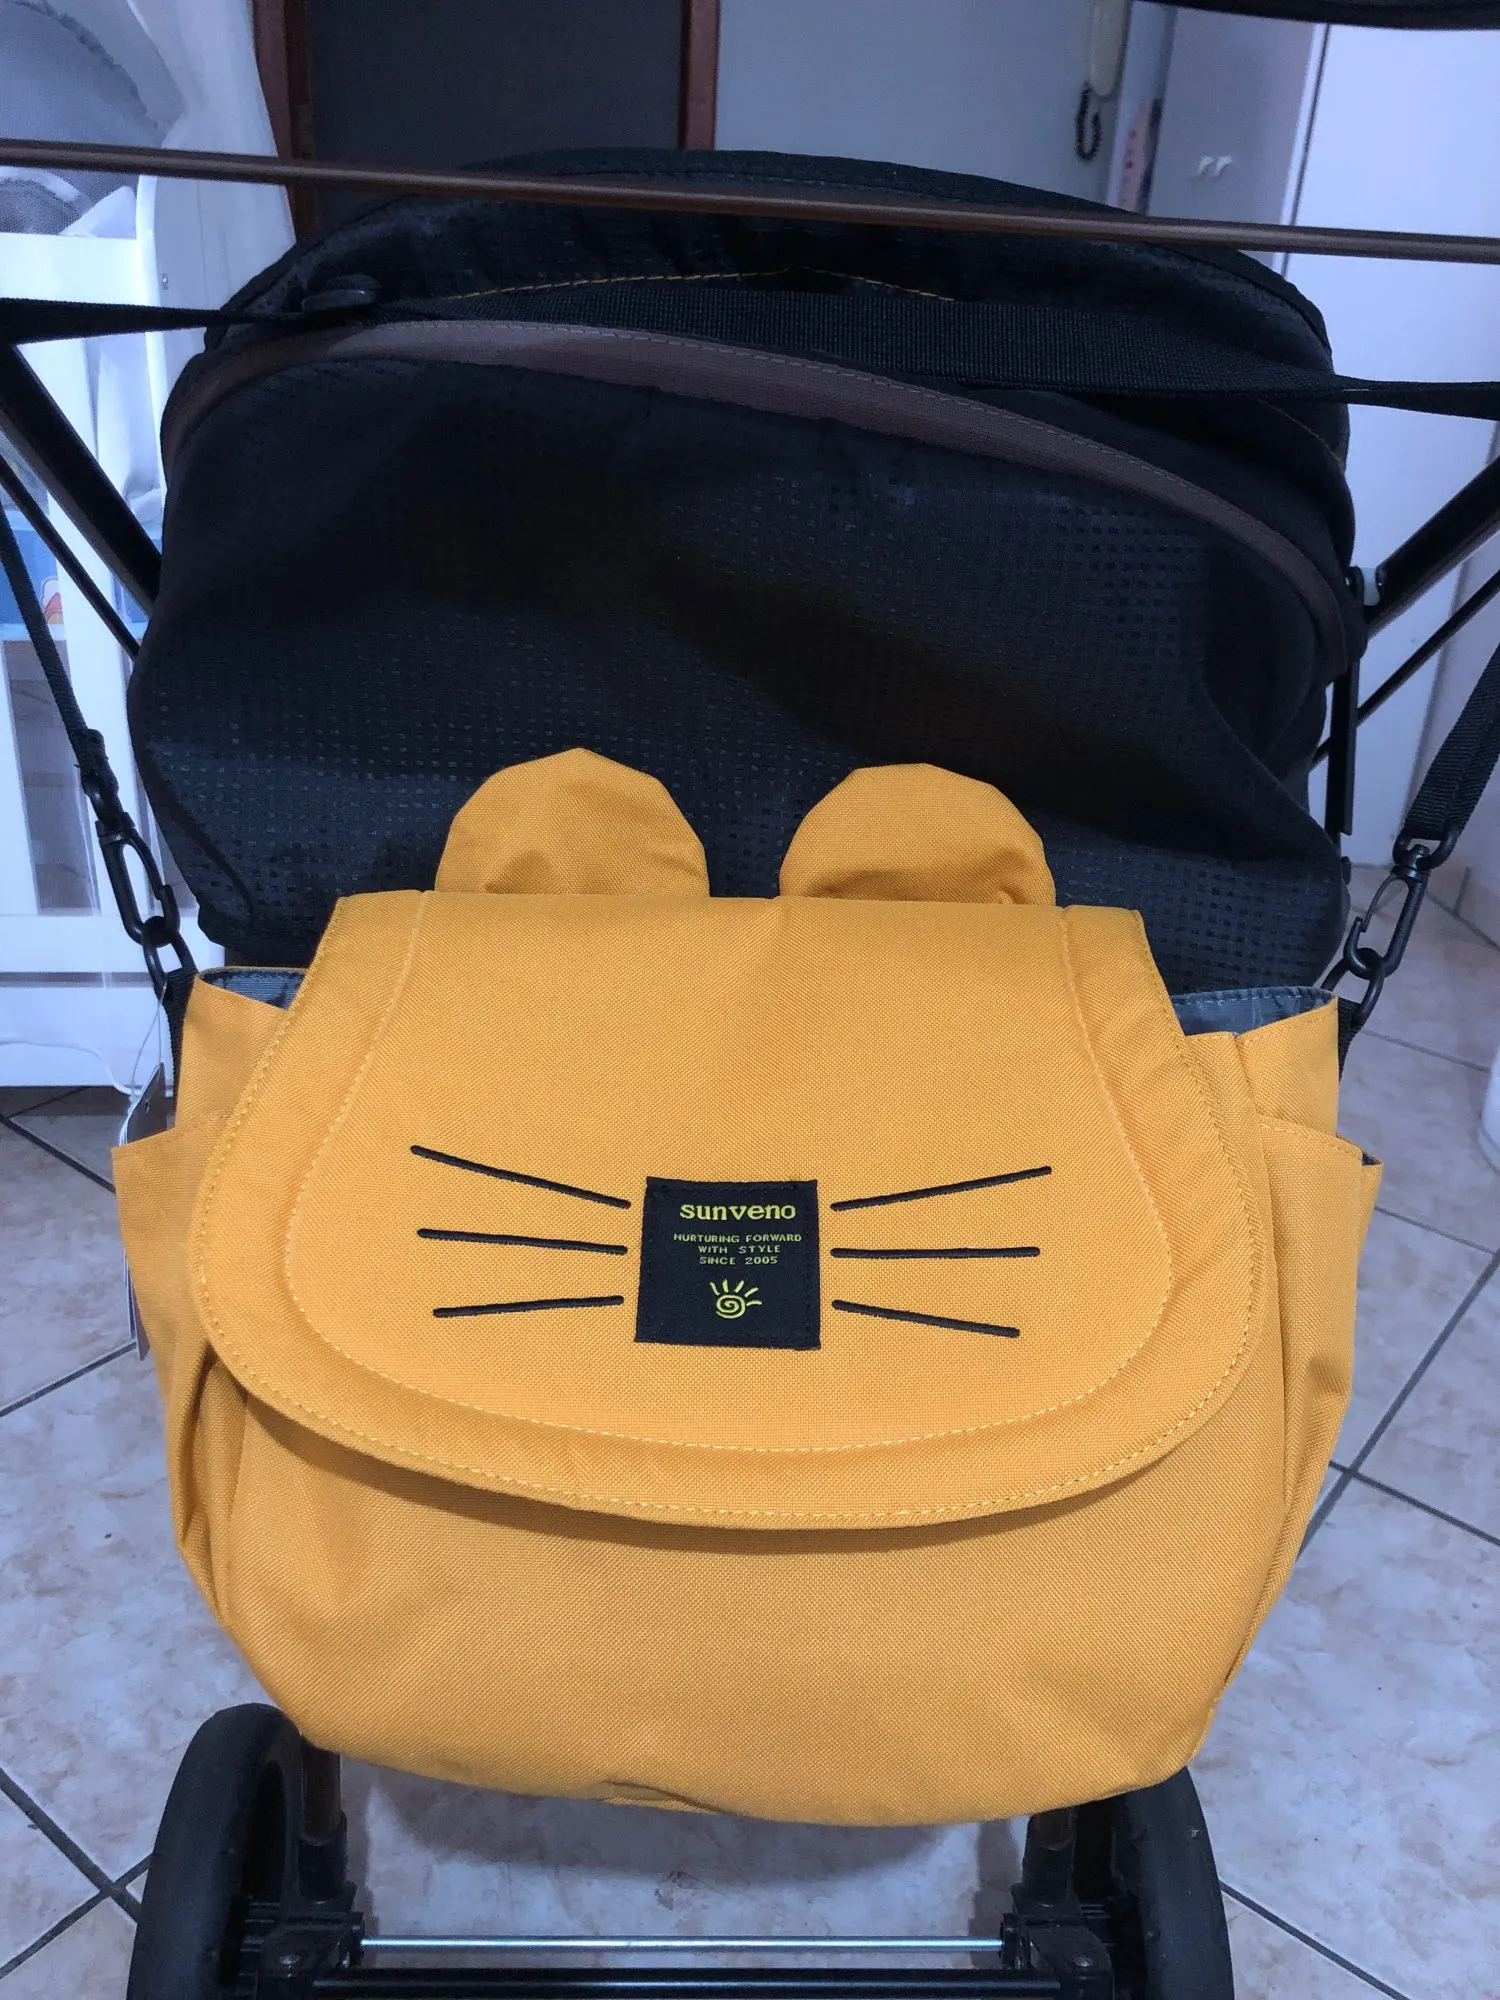 Meow-tain Large Capacity Cat Diaper Bag for Stylish and Organized Travels - Mom Essentials - Black or Yellow photo review